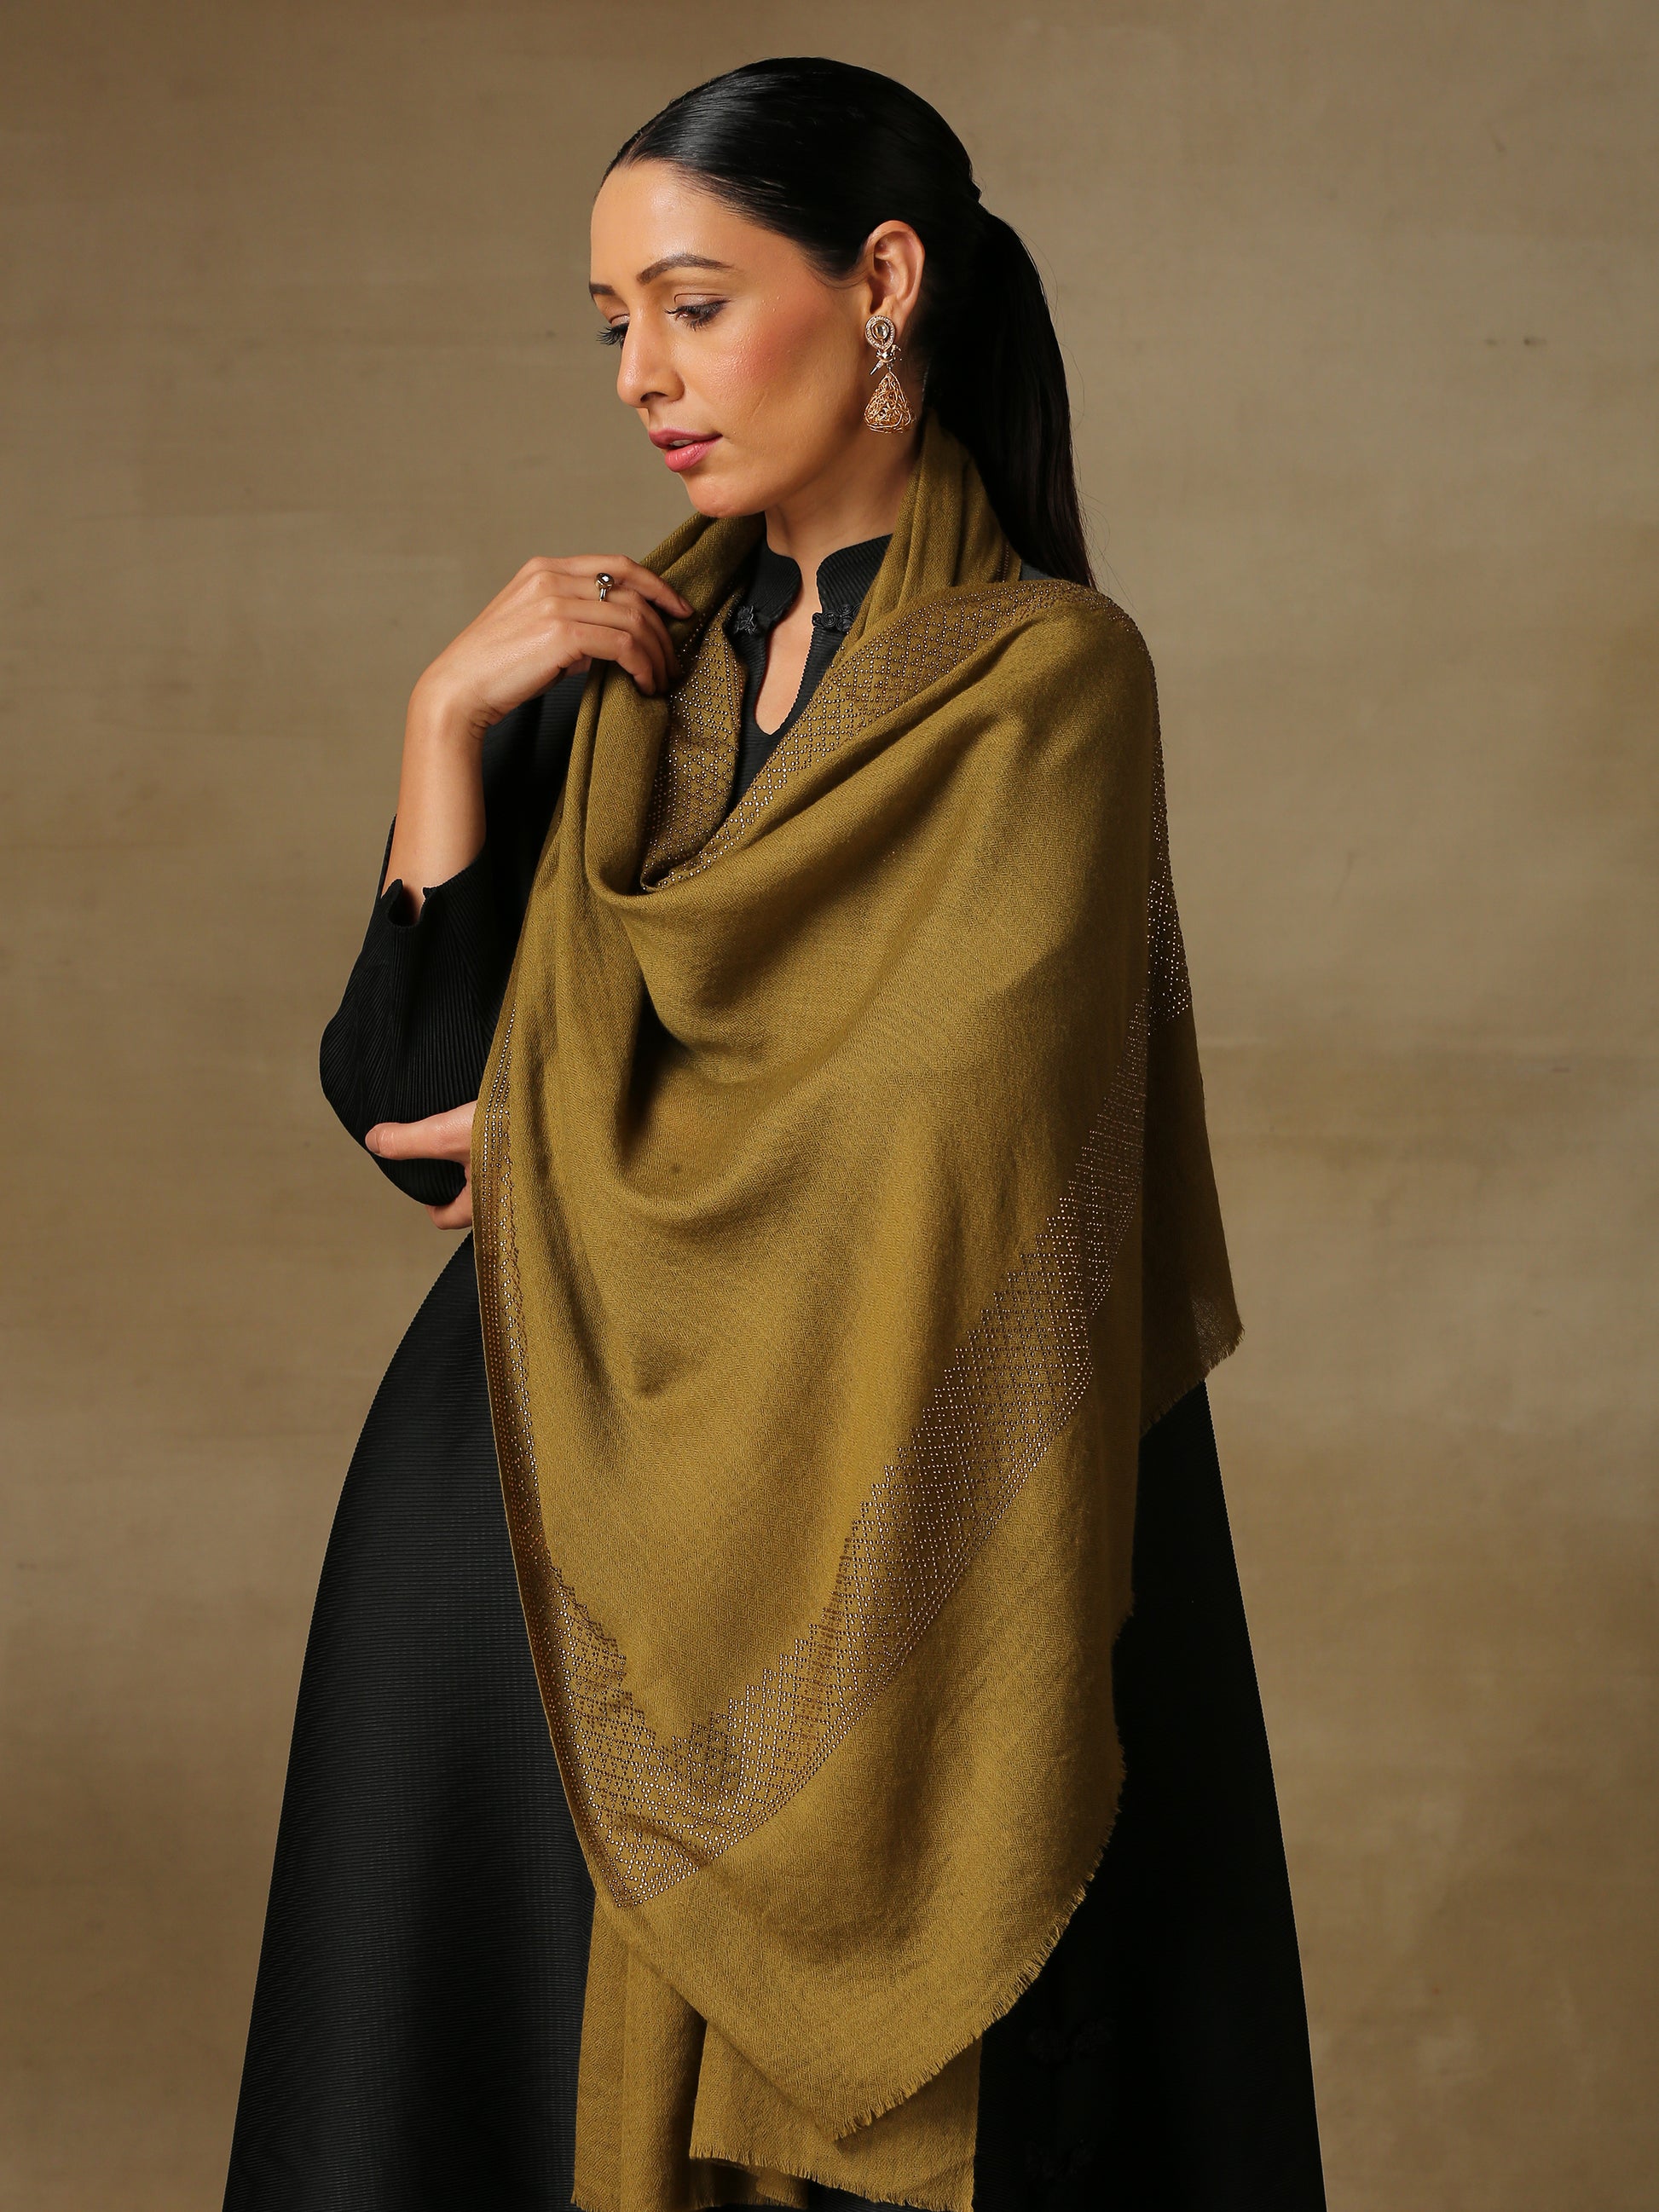 Model is wearing a henna coloured stole from the Era of Zaywar Border Swarovski Stole collection, hand embellished with gold swarovski in a cubes design. 